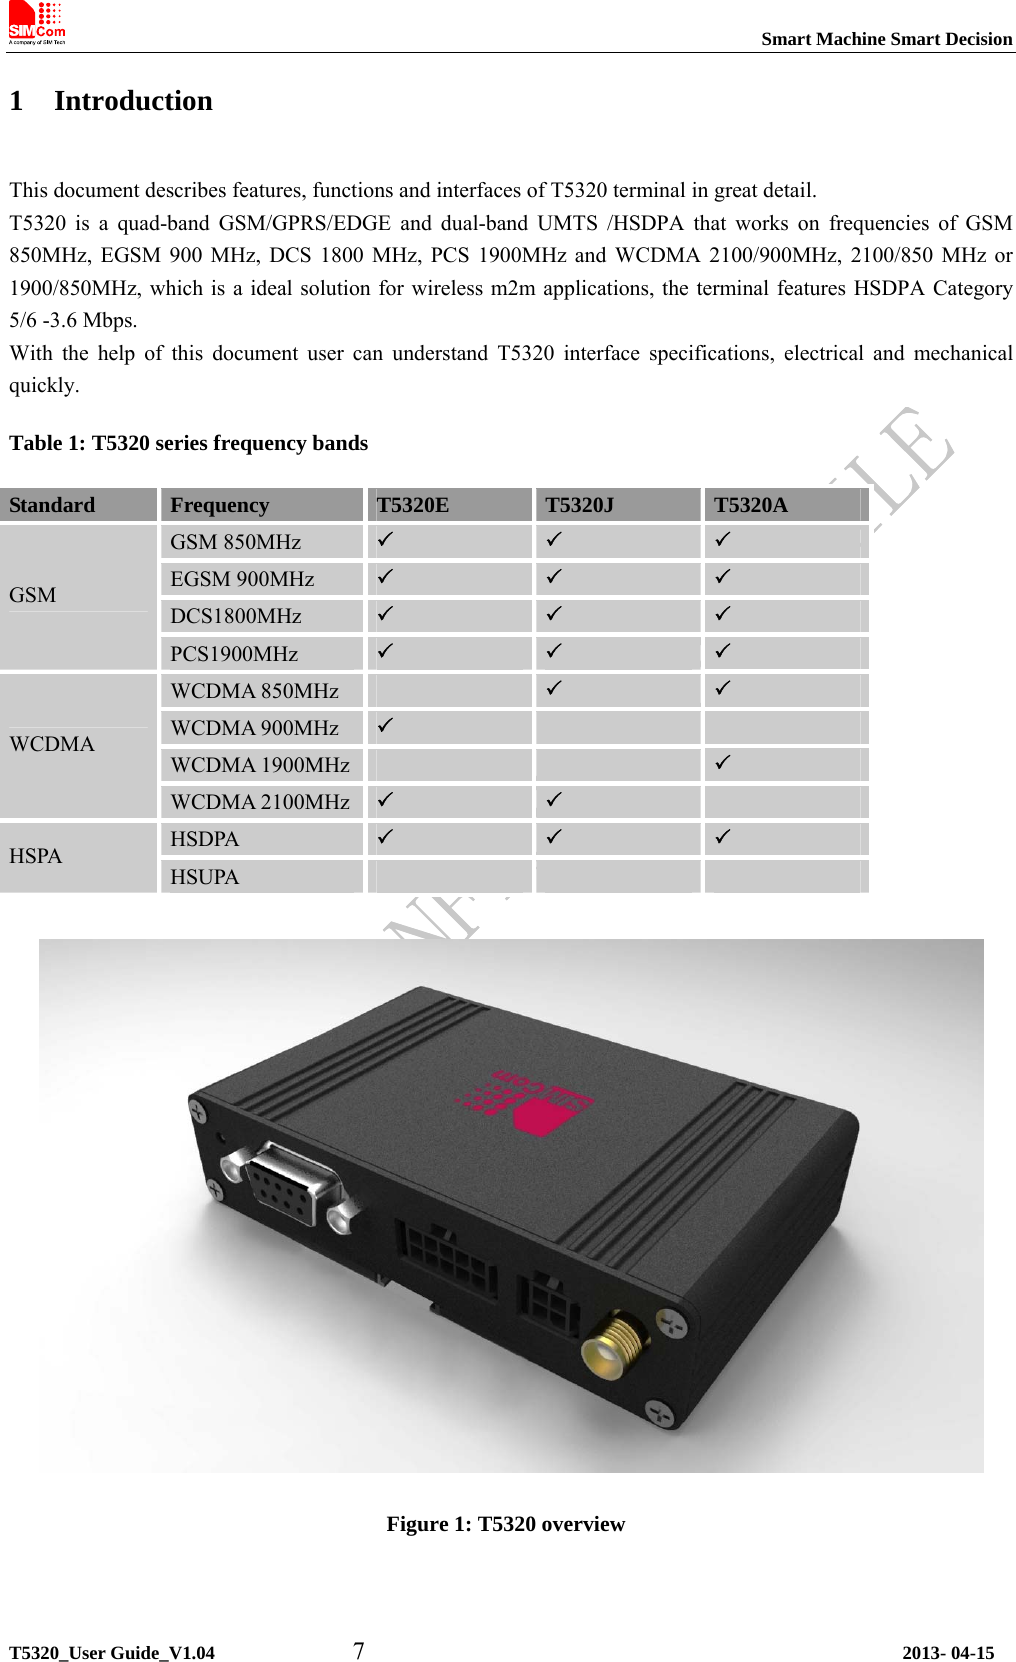                                                                           Smart Machine Smart Decision             1 Introduction This document describes features, functions and interfaces of T5320 terminal in great detail.   T5320 is a quad-band GSM/GPRS/EDGE and dual-band UMTS /HSDPA that works on frequencies of GSM 850MHz, EGSM 900 MHz, DCS 1800 MHz, PCS 1900MHz and WCDMA 2100/900MHz, 2100/850 MHz or 1900/850MHz, which is a ideal solution for wireless m2m applications, the terminal features HSDPA Category 5/6 -3.6 Mbps. With the help of this document user can understand T5320 interface specifications, electrical and mechanical quickly.  Table 1: T5320 series frequency bands Standard  Frequency  T5320E  T5320J  T5320A GSM 850MHz  3 3 3 EGSM 900MHz  3 3 3 DCS1800MHz  3 3 3 GSM PCS1900MHz  3 3 3 WCDMA 850MHz  3  3 WCDMA 900MHz   3  WCDMA 1900MHz     3 WCDMA WCDMA 2100MHz  3 3  HSDPA  3 3 3 HSPA HSUPA       Figure 1: T5320 overview   T5320_User Guide_V1.04           7                                           2013- 04-15 